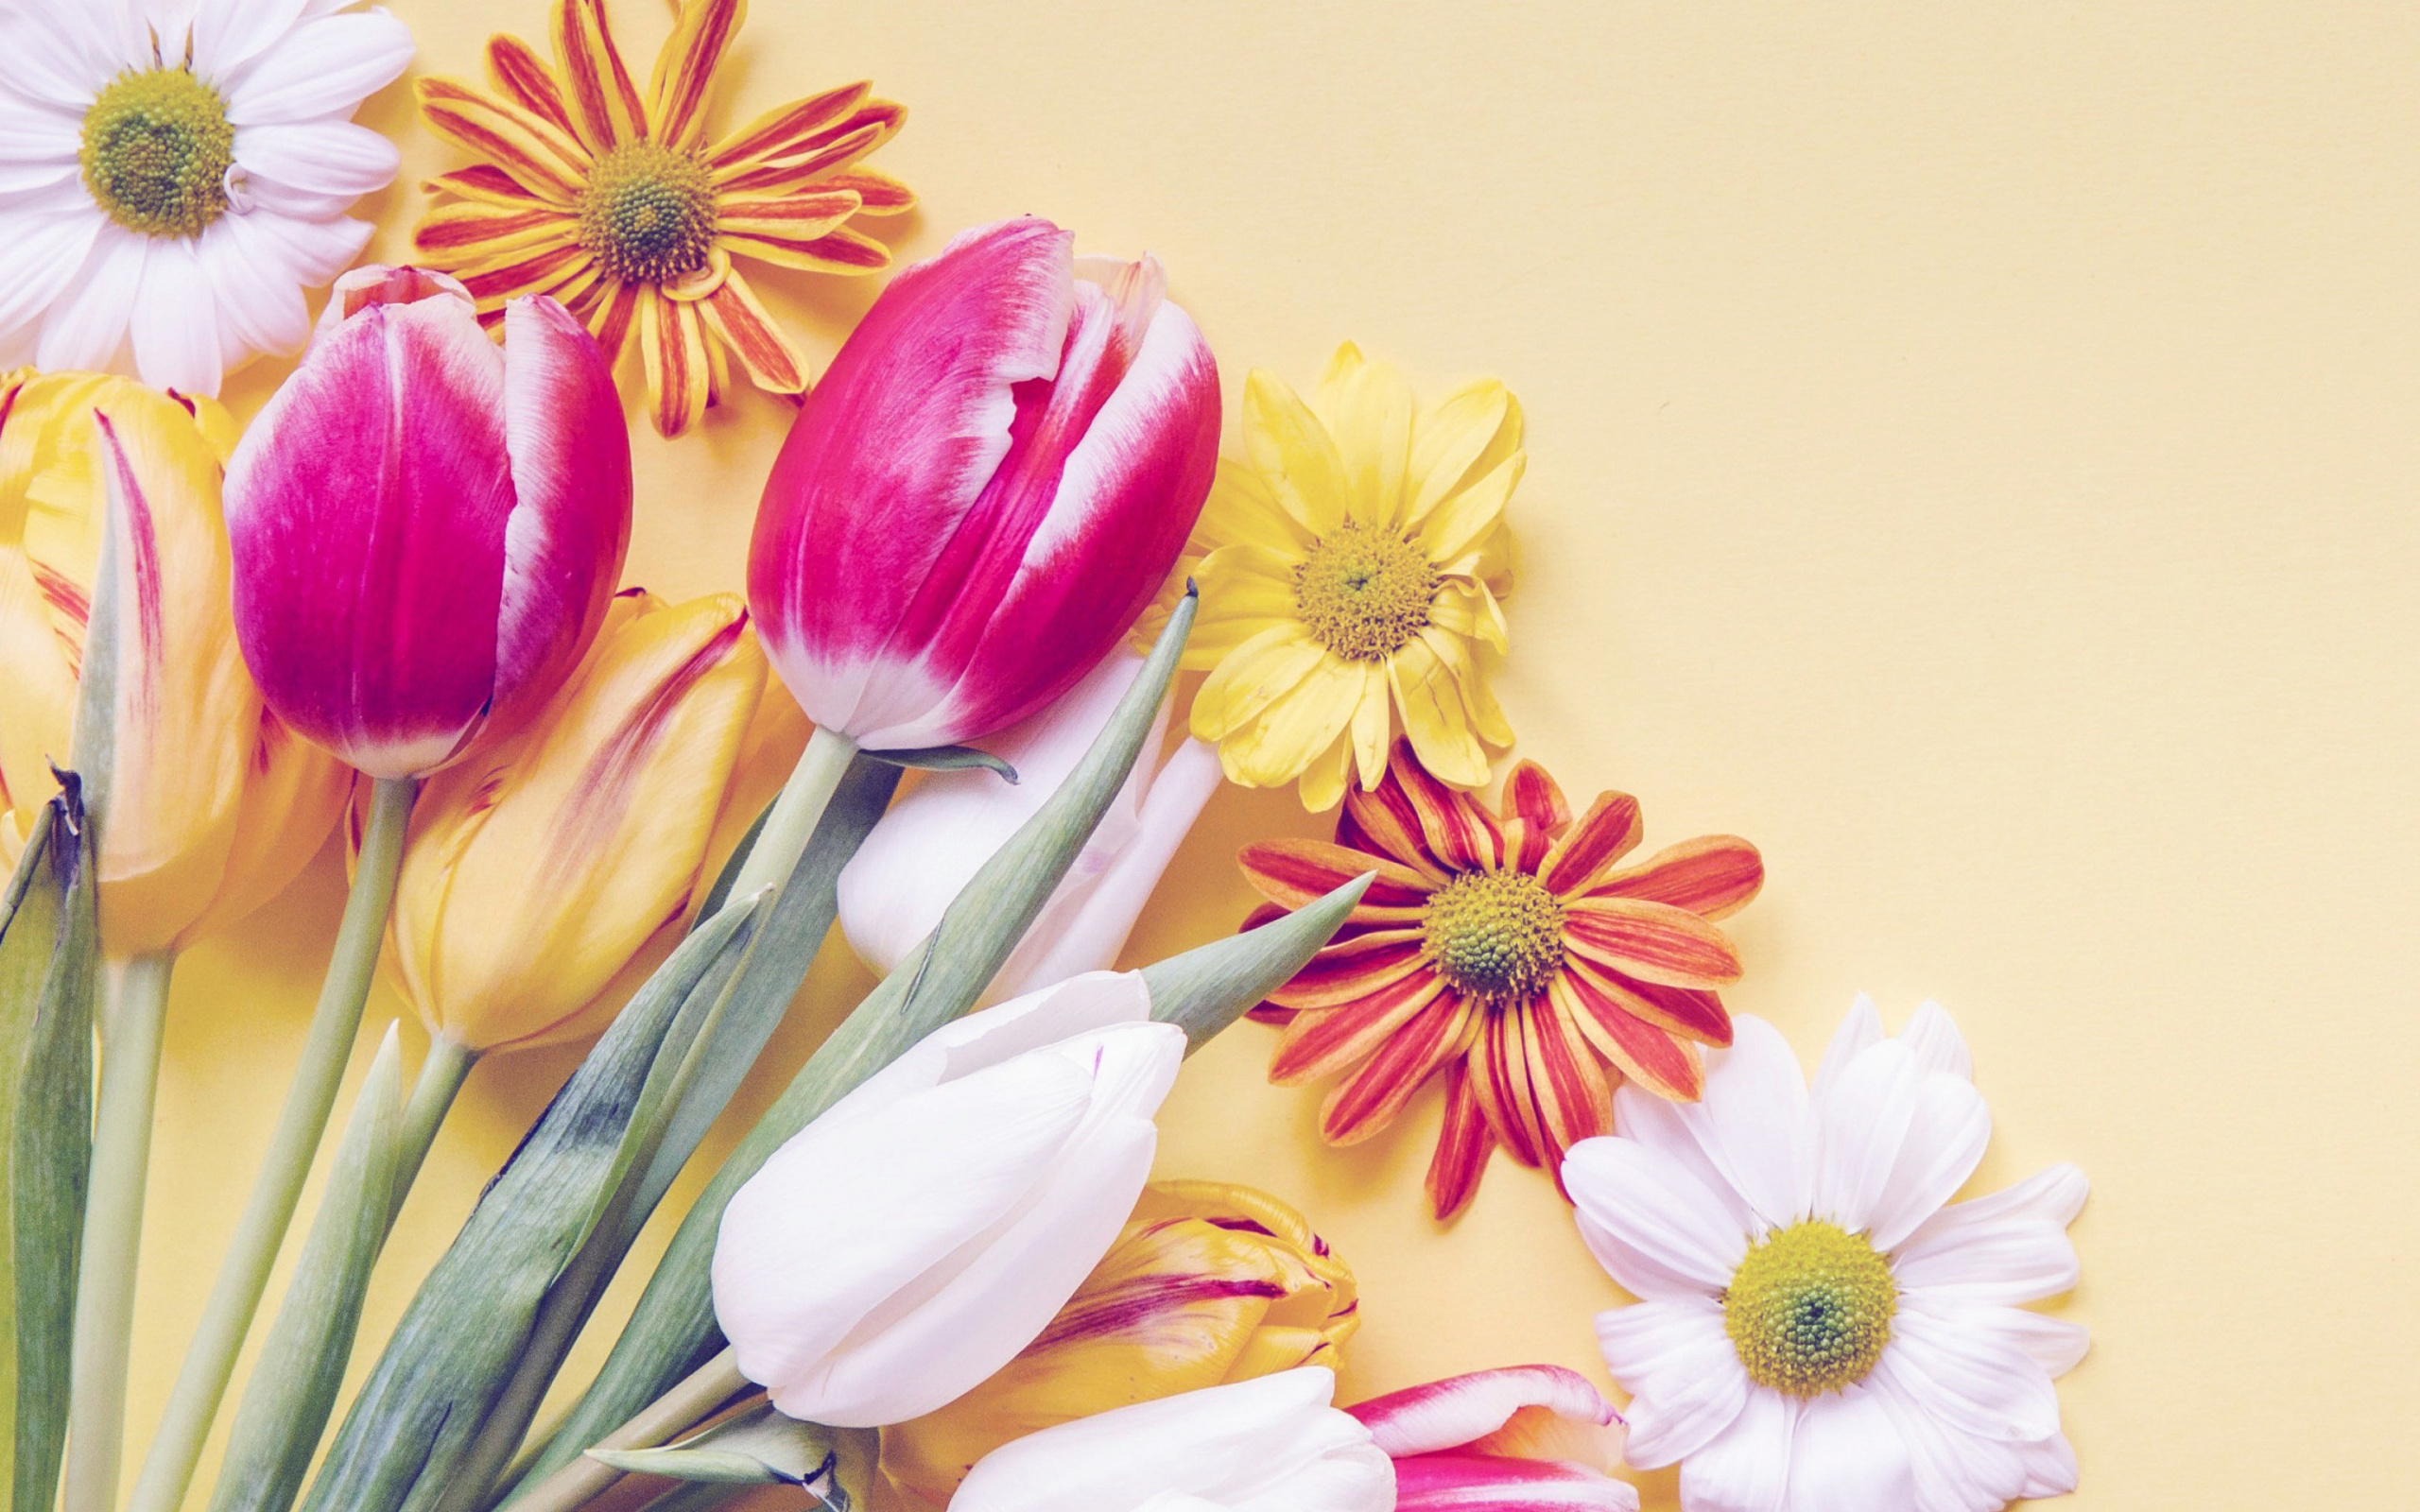 Spring tulips on yellow background wallpaper 2560x1600